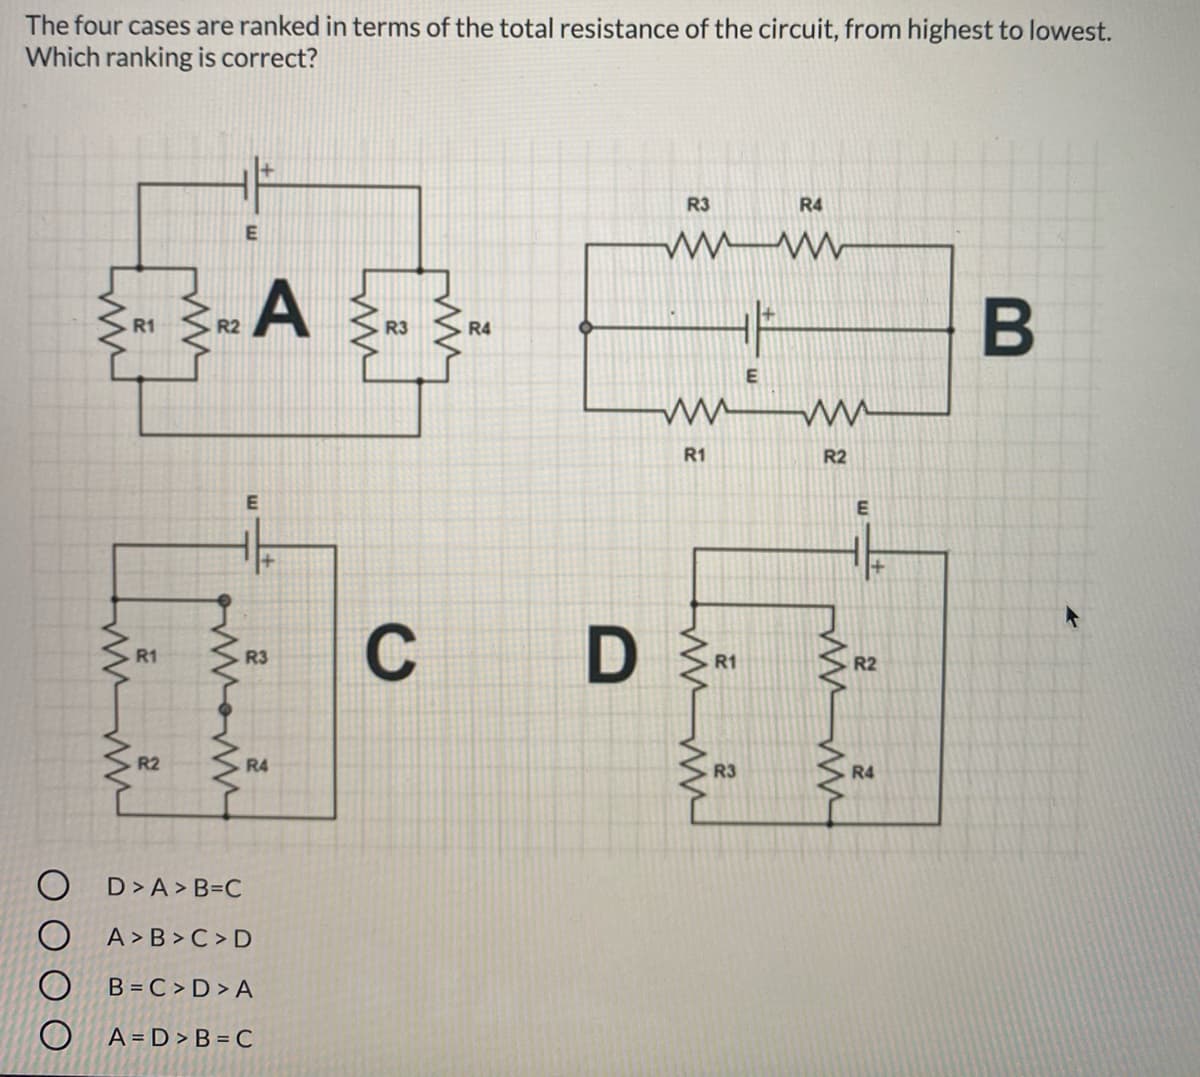 The four cases are ranked in terms of the total resistance of the circuit, from highest to lowest.
Which ranking is correct?
R3
R4
A
R1
R2
R3
R4
E
R1
R2
C
D
R1
R3
R1
R2
R2
R4
R3
R4
D> A > B=C
A > B > C > D
B = C > D > A
O A=D>B = C
B
w
